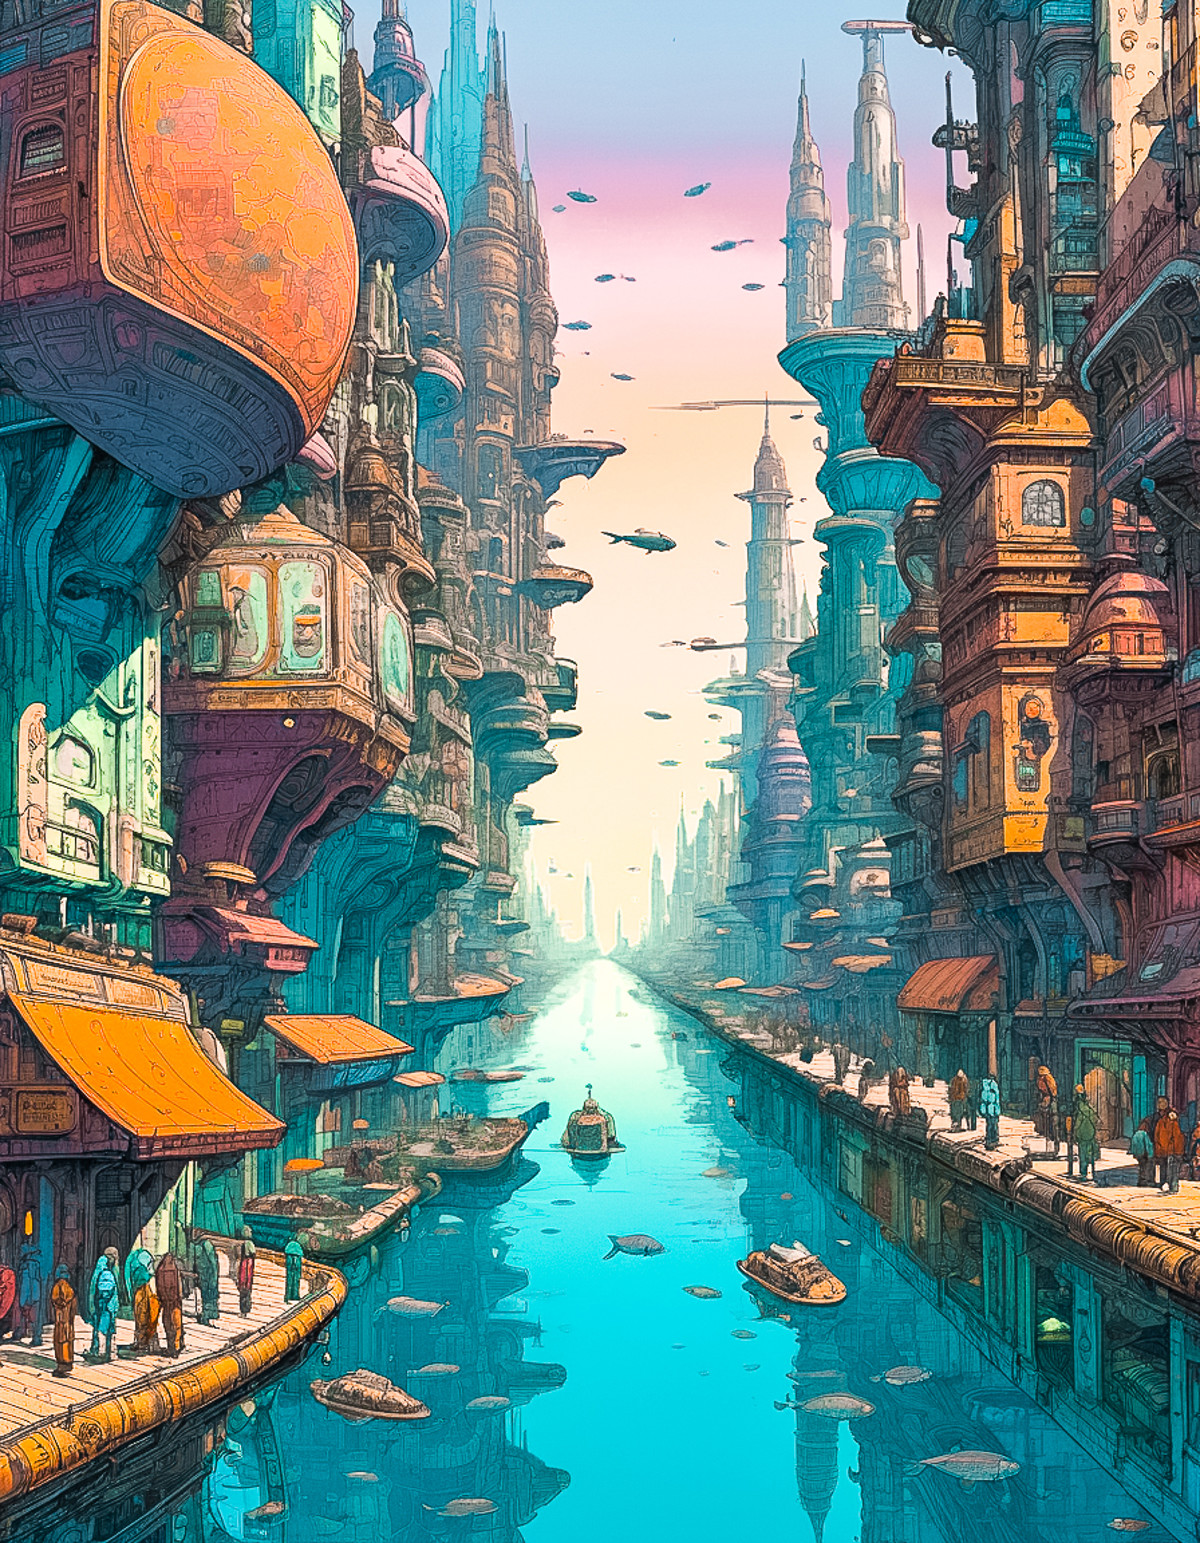 moebius,bilal inspired euro sci-fi art a bustling underwater city with different city sections reflecting varying technolo...